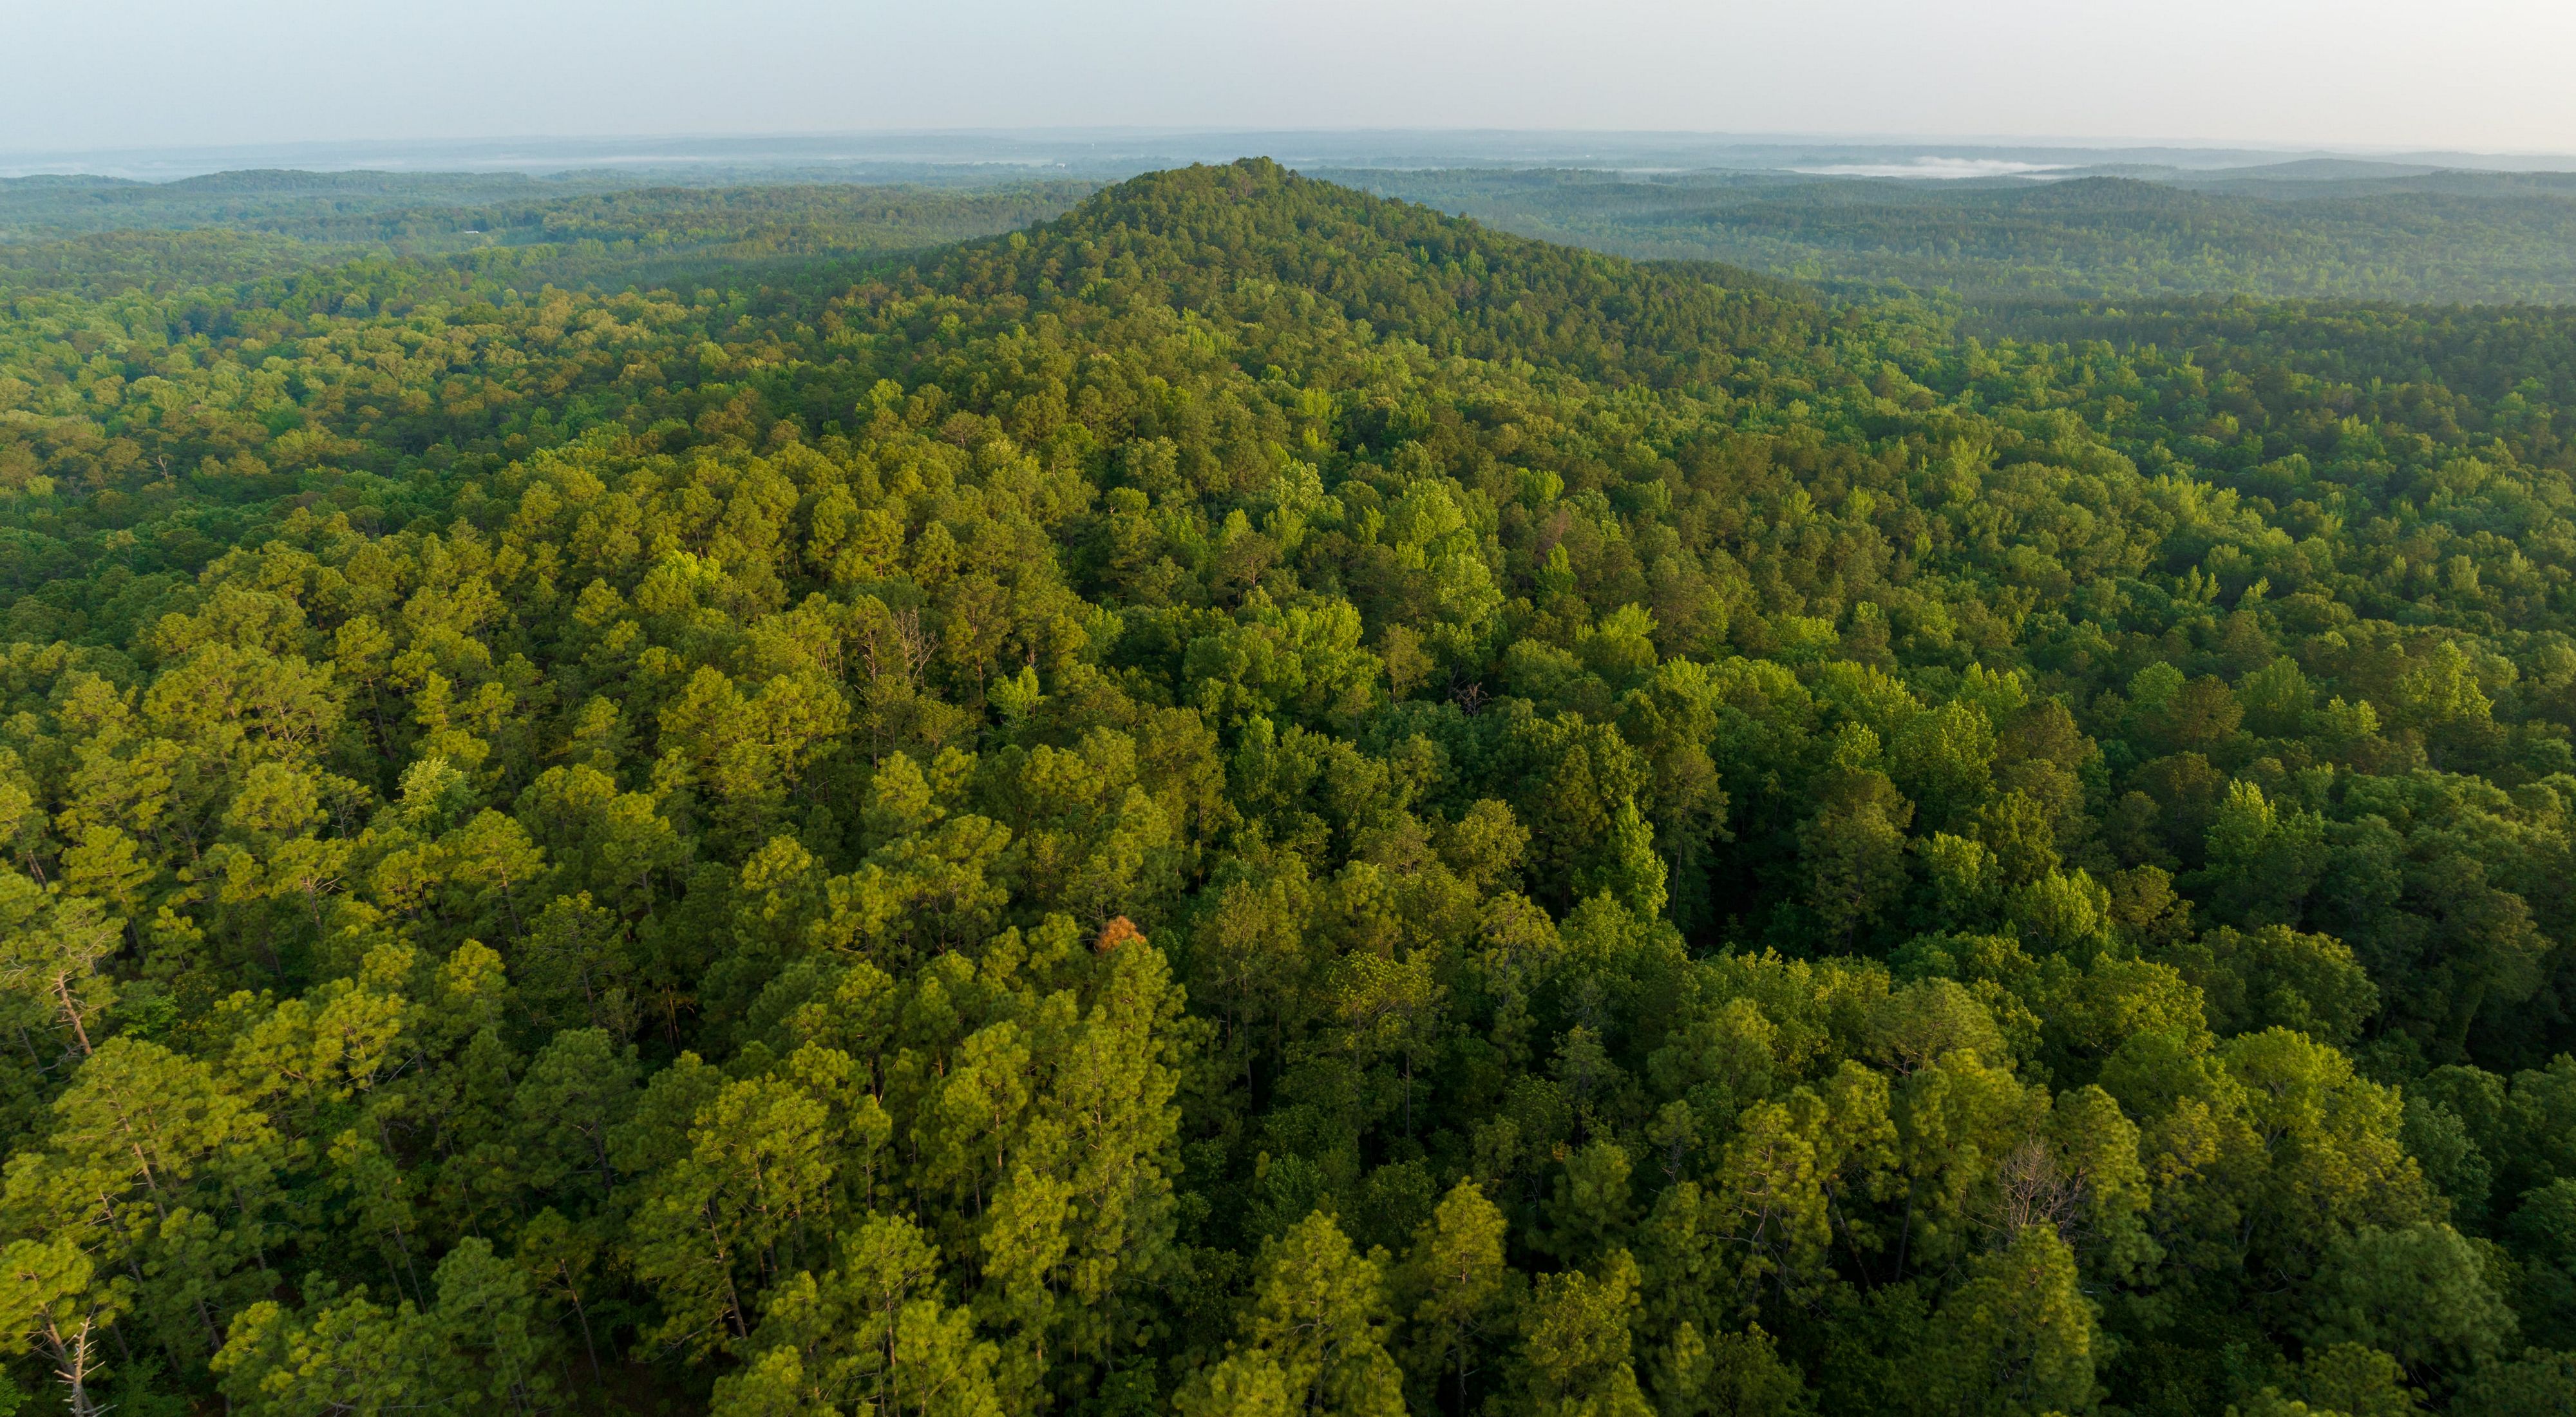 A small mountain covered in trees emerges from a forested landscape.